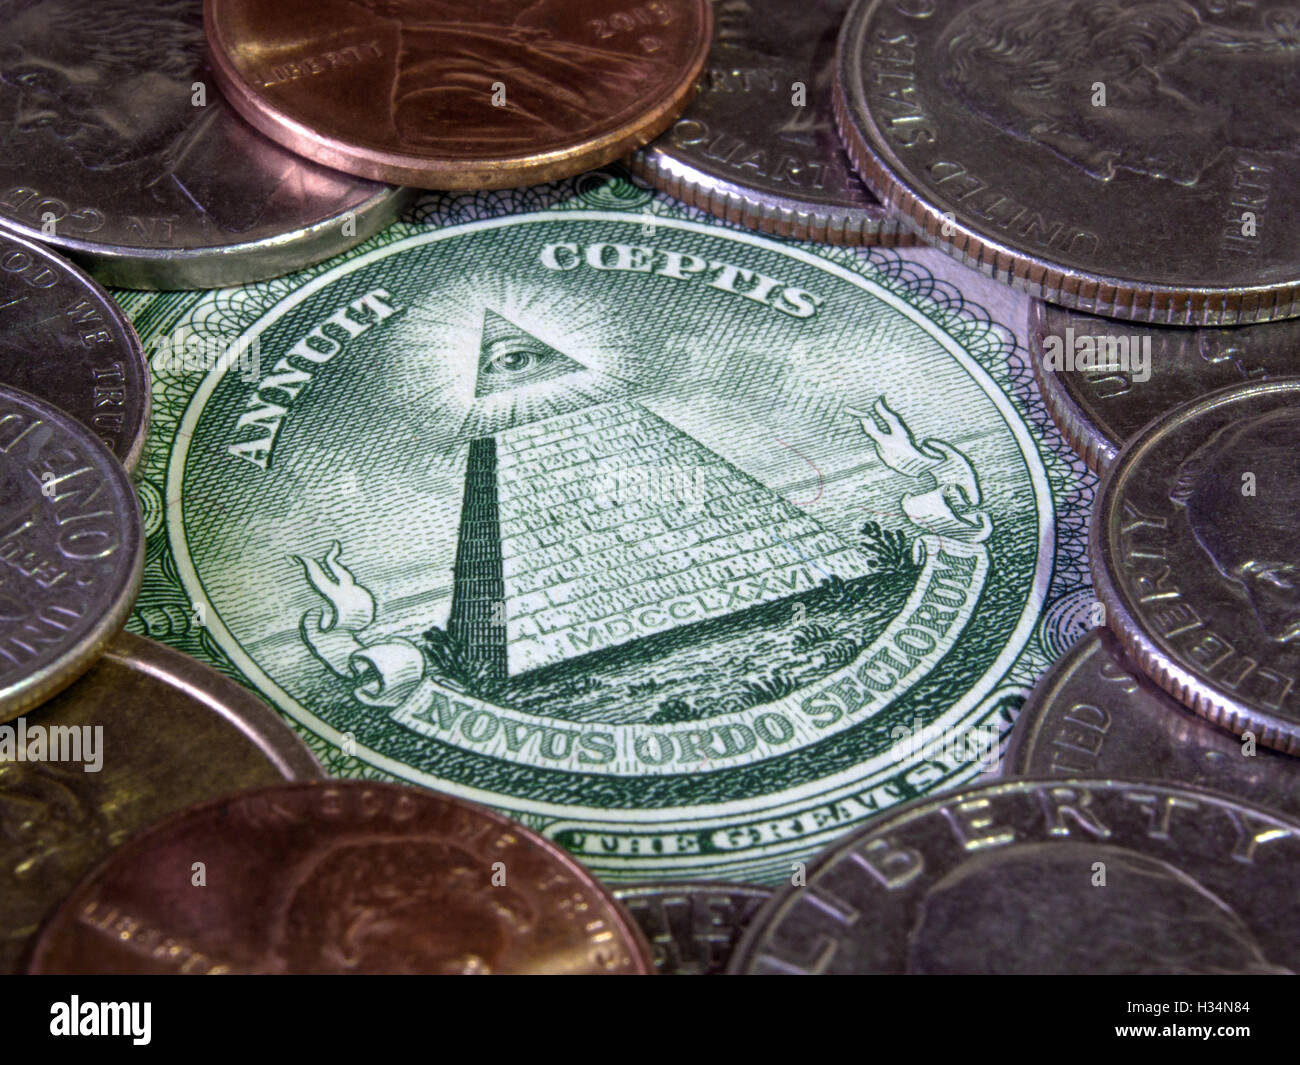 Coins and currency notes Stock Photo